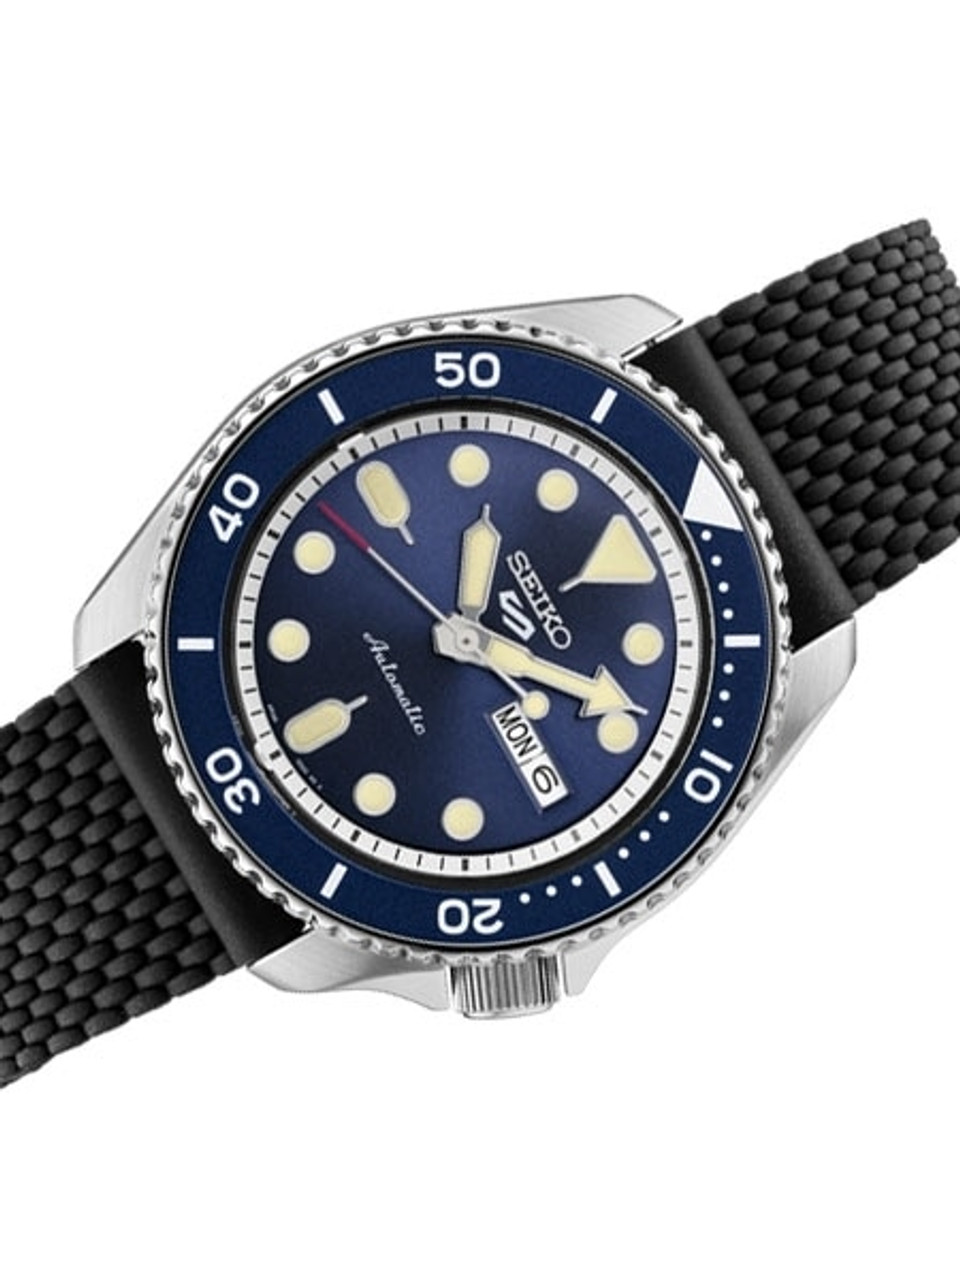 Seiko 5 Sports Automatic 24-Jewel Watch with Blue Dial #SRPD93